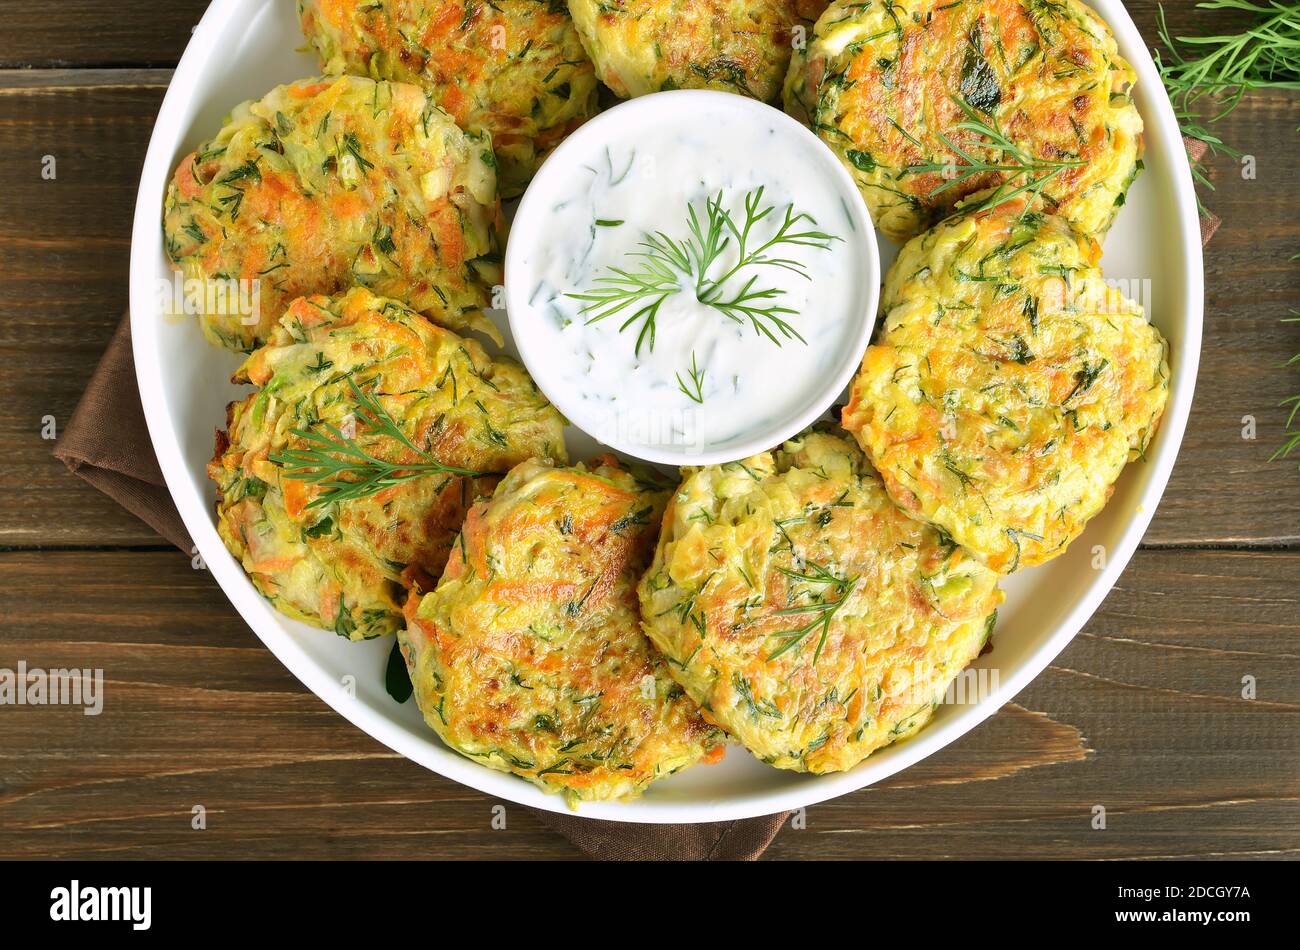 Diet vegetable cutlet from zucchini, carrot, herbs on wooden table.  Top view, flat lay Stock Photo